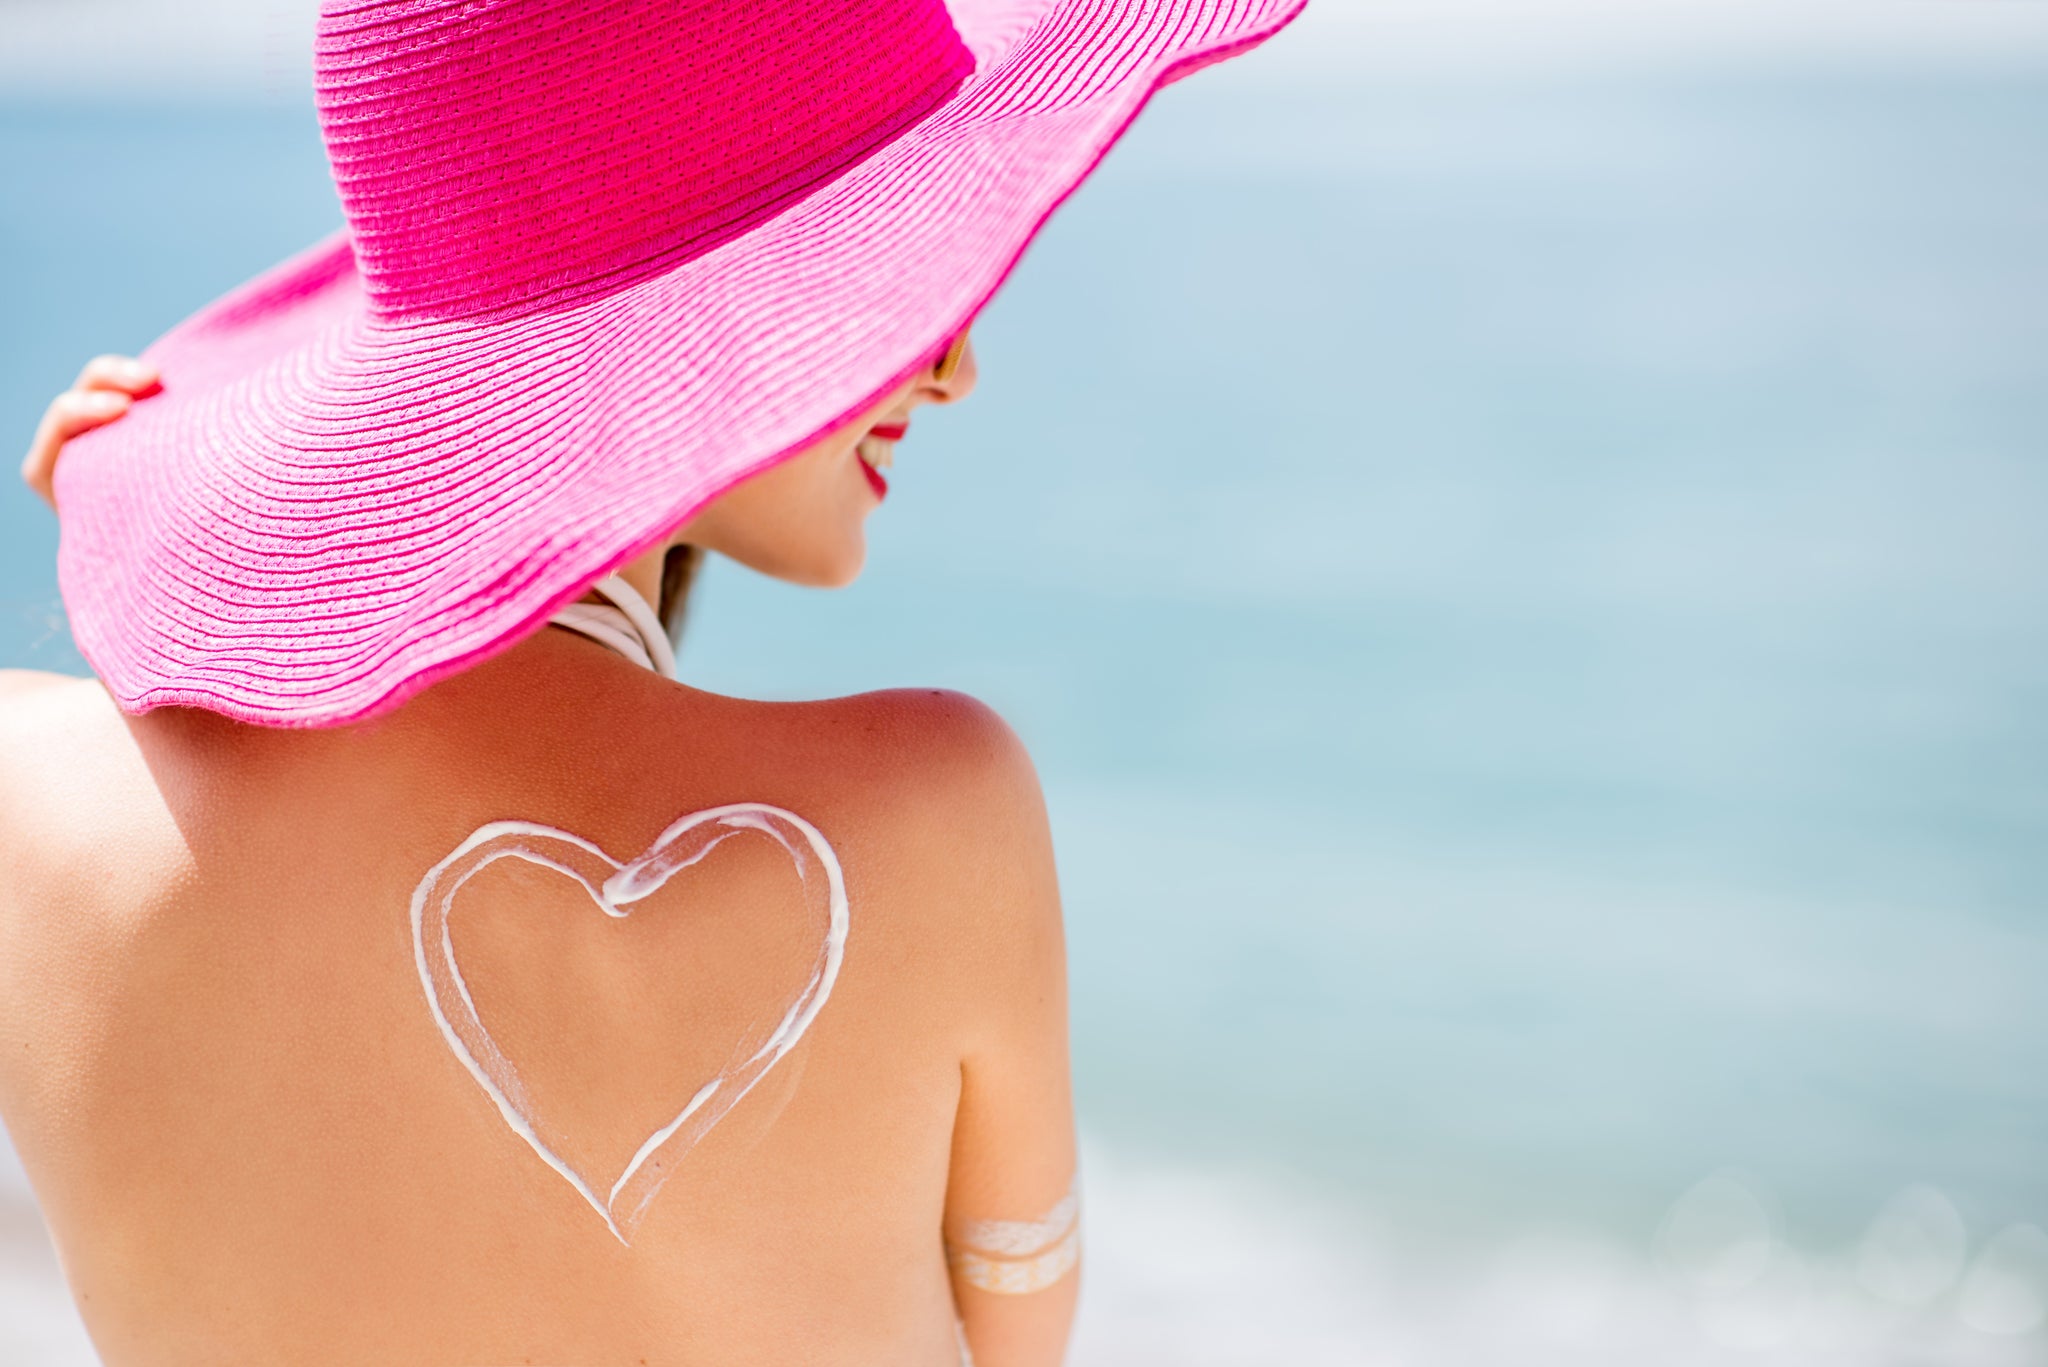 Effective sun protection means both on your skin and in your skin.